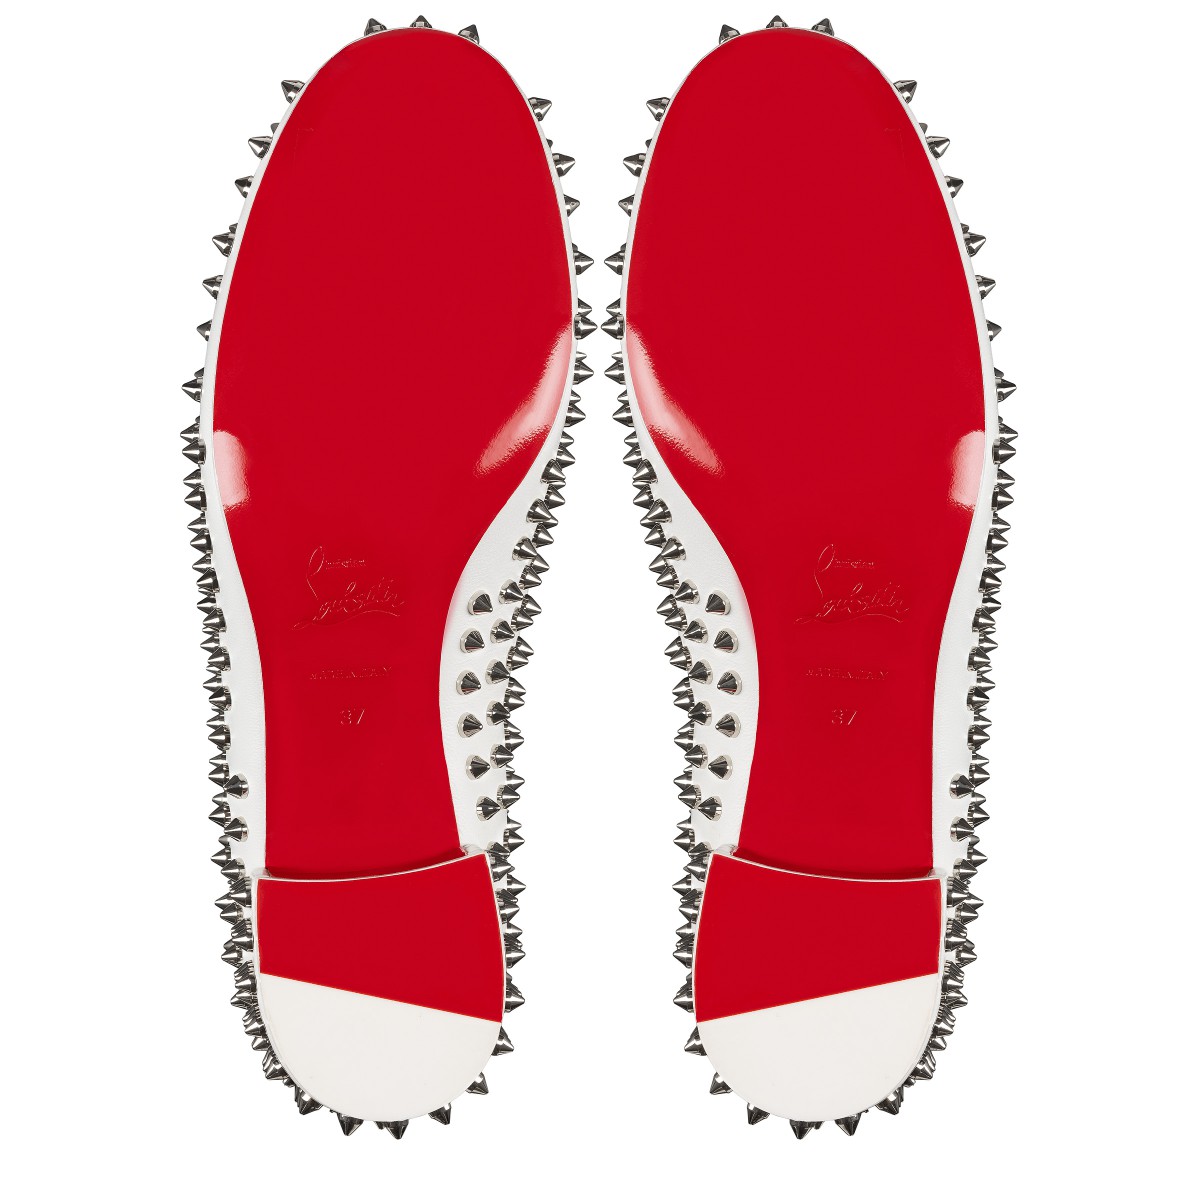 Shoes - Spikeasy - Christian Louboutin